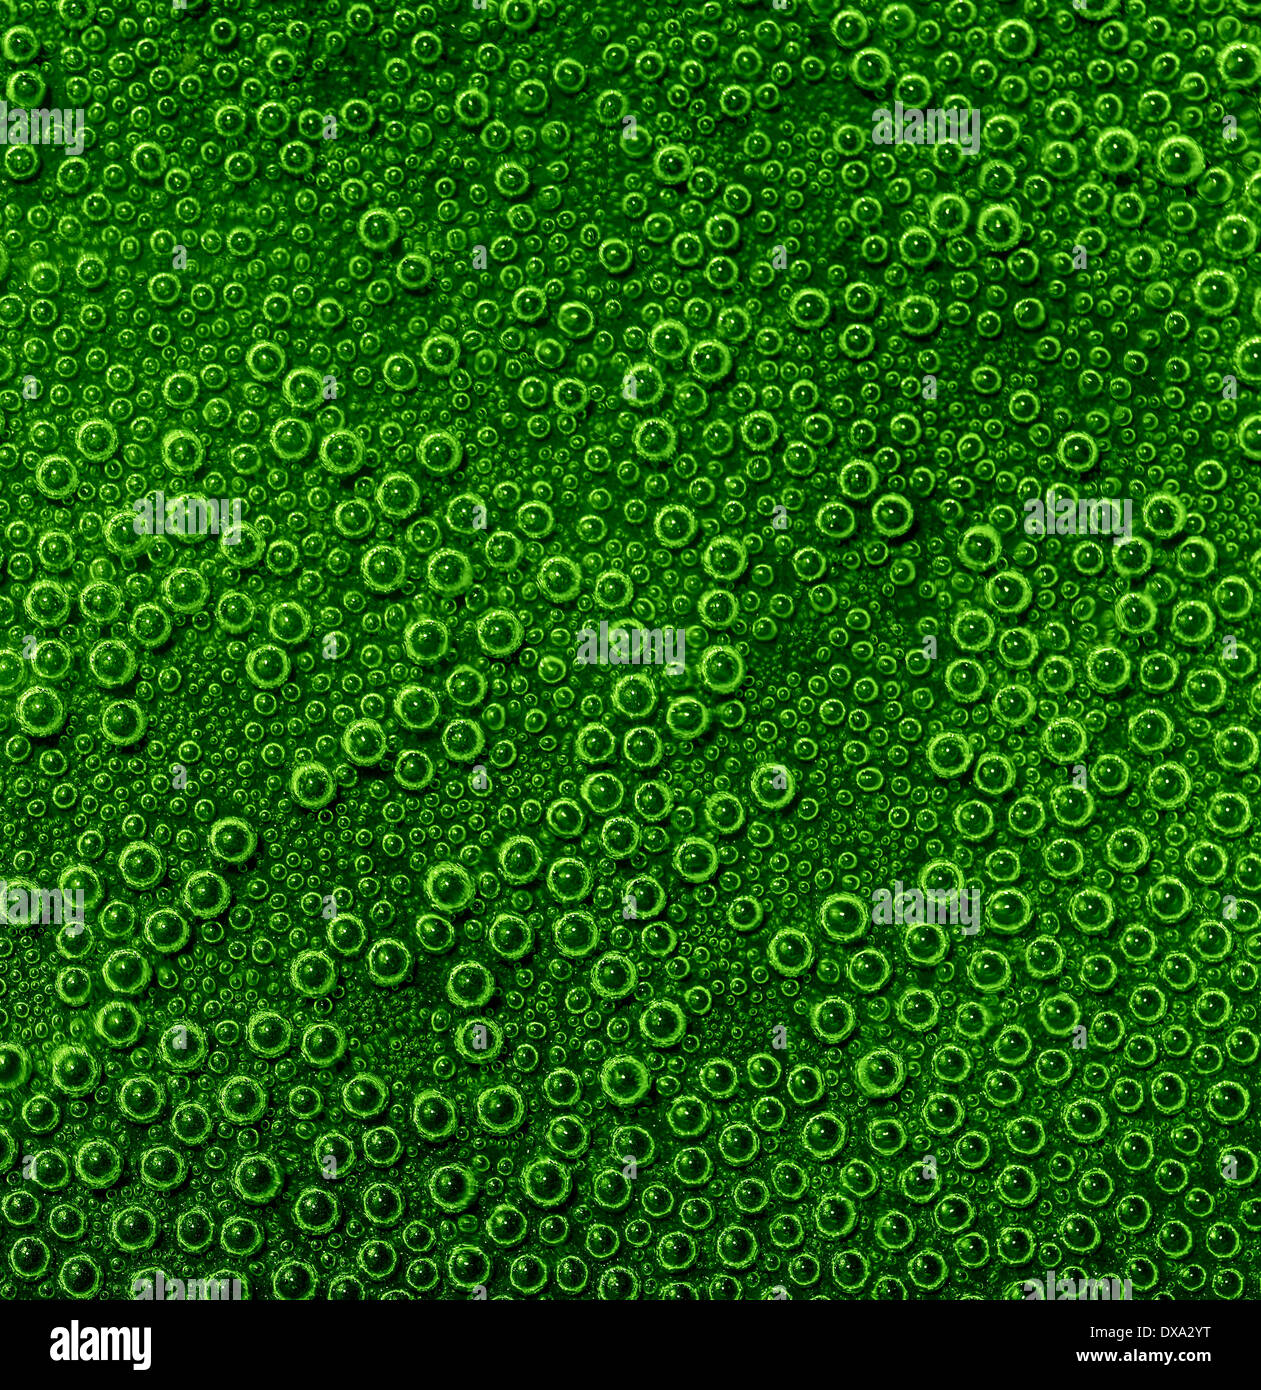 full frame abstract underwater background with lots of small air bubbles in green ambiance Stock Photo